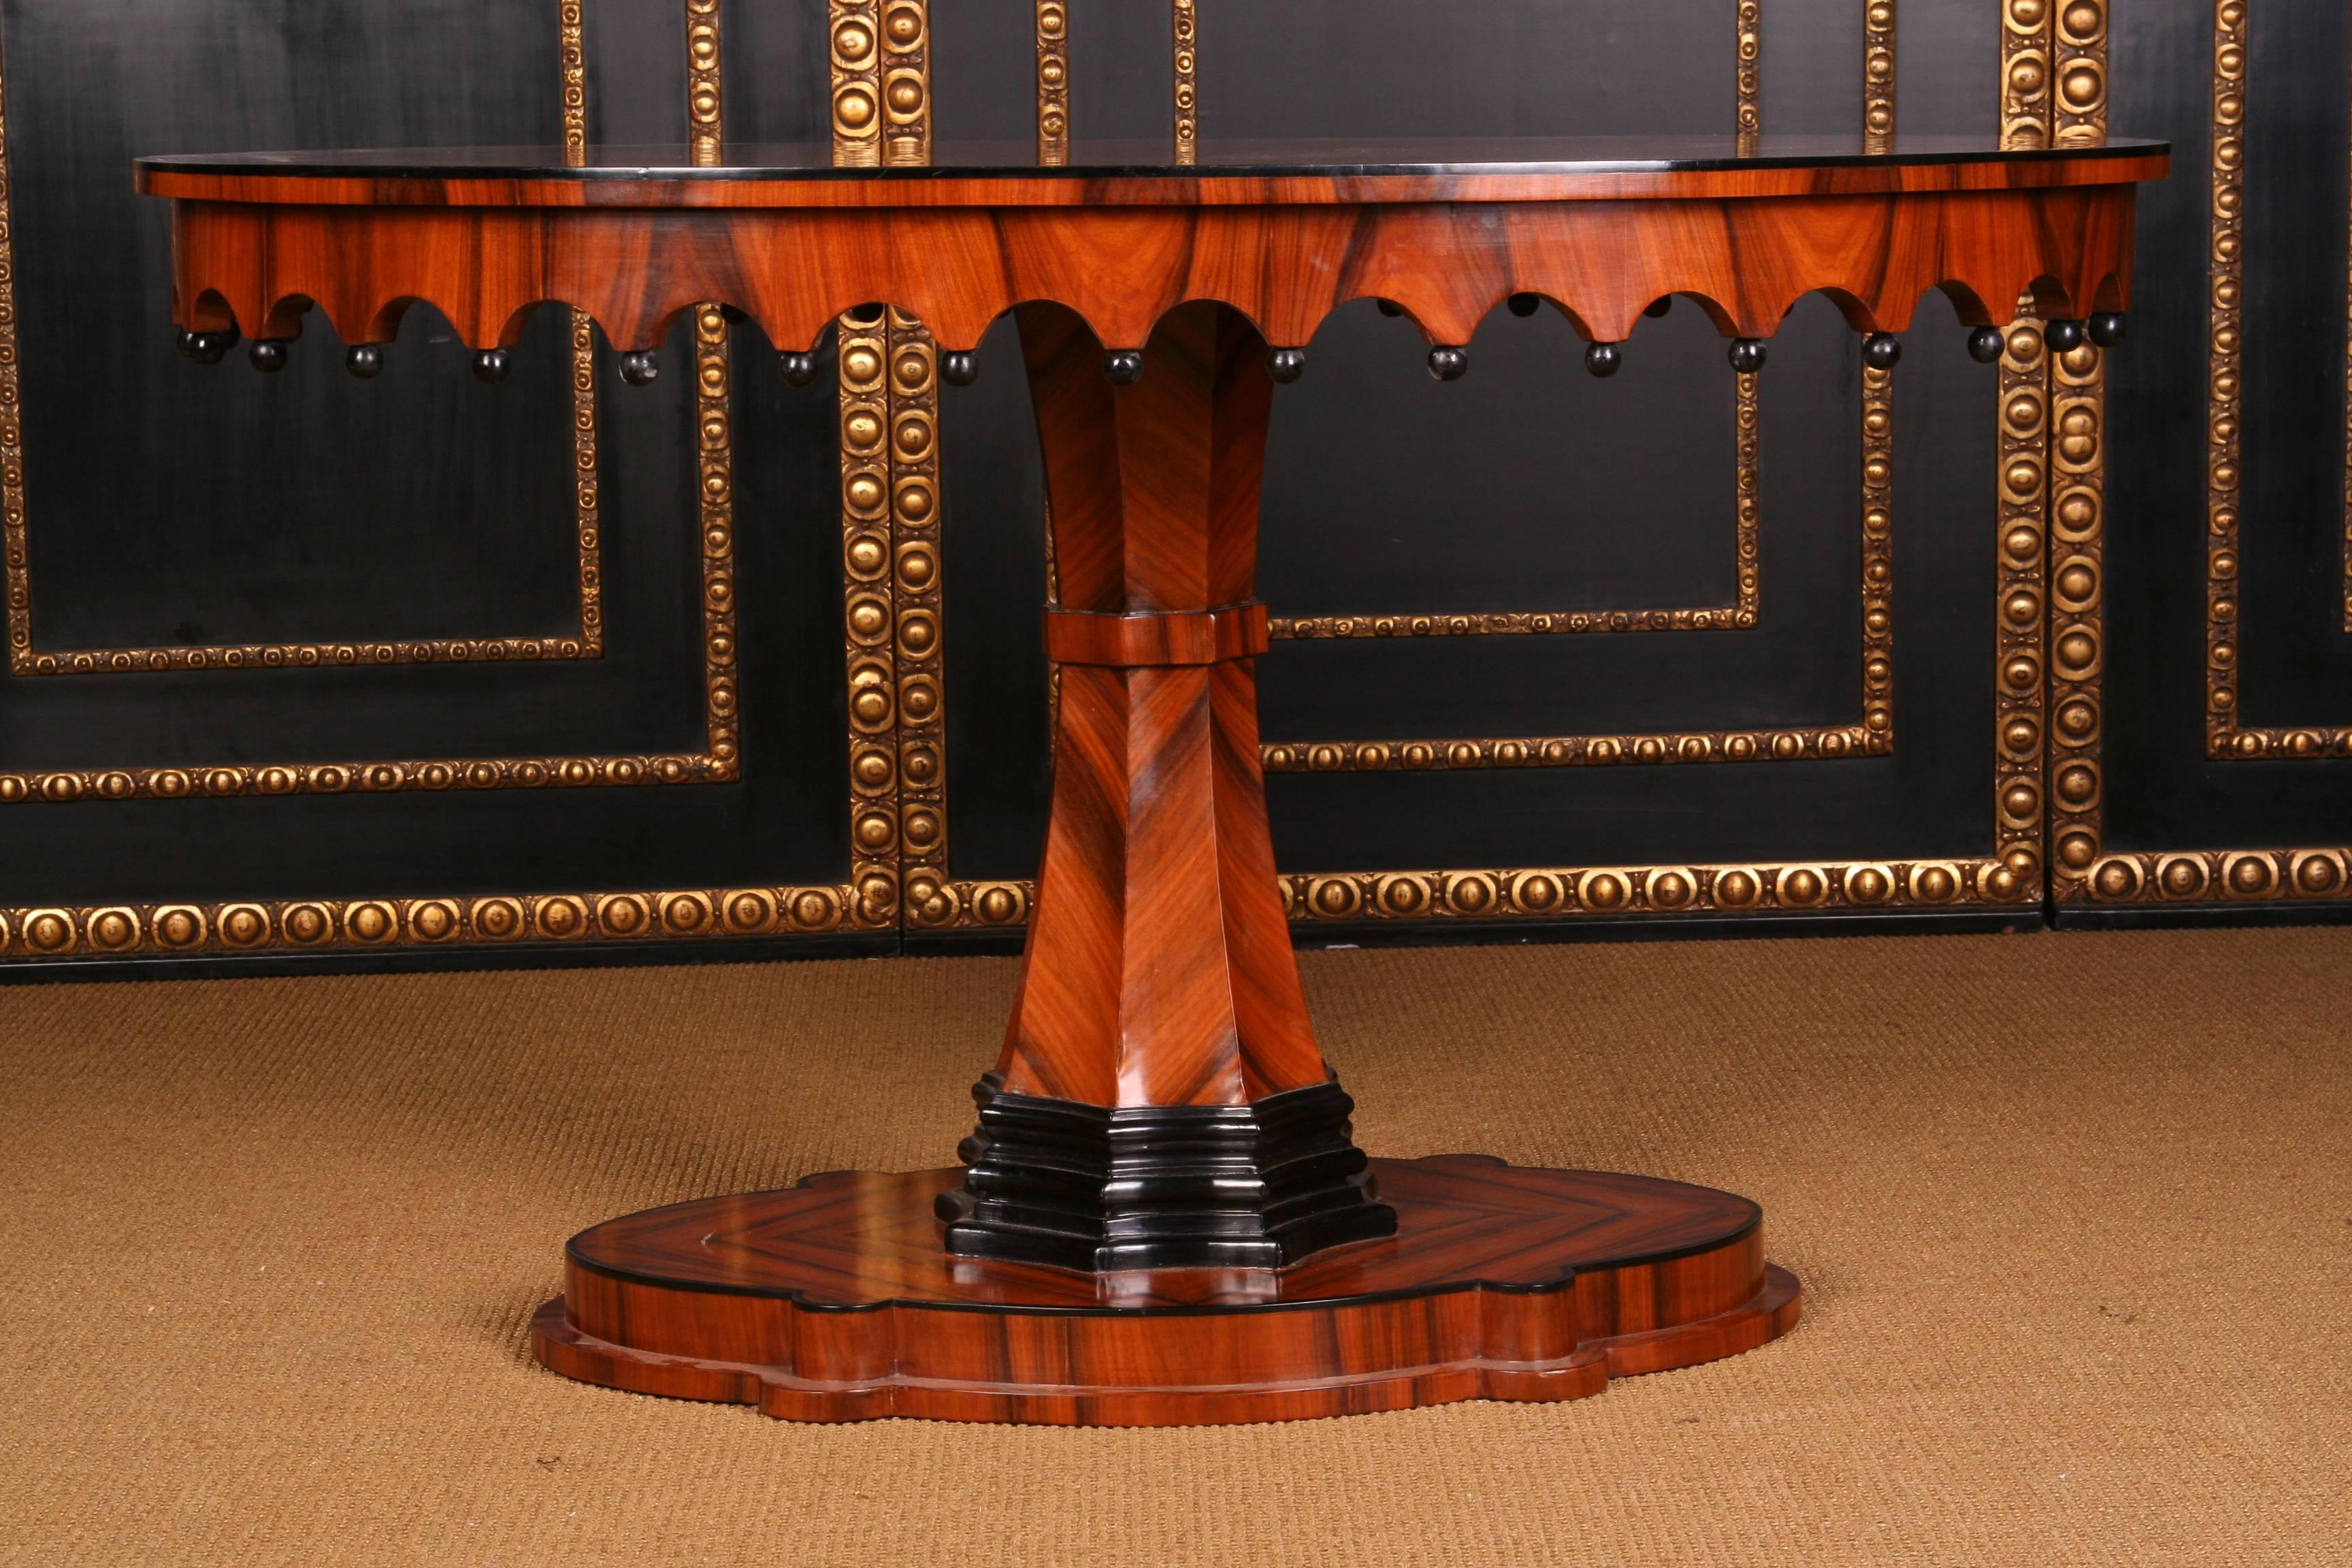 Exotic rosewood on solid wood. Oval curved and profiled base plate. Centrally rising, eightfold folded fan-shaped column, partly blackened. Gothic frame with protruding profile plate. This form is extremely rare. Patina and honey-colored veneer